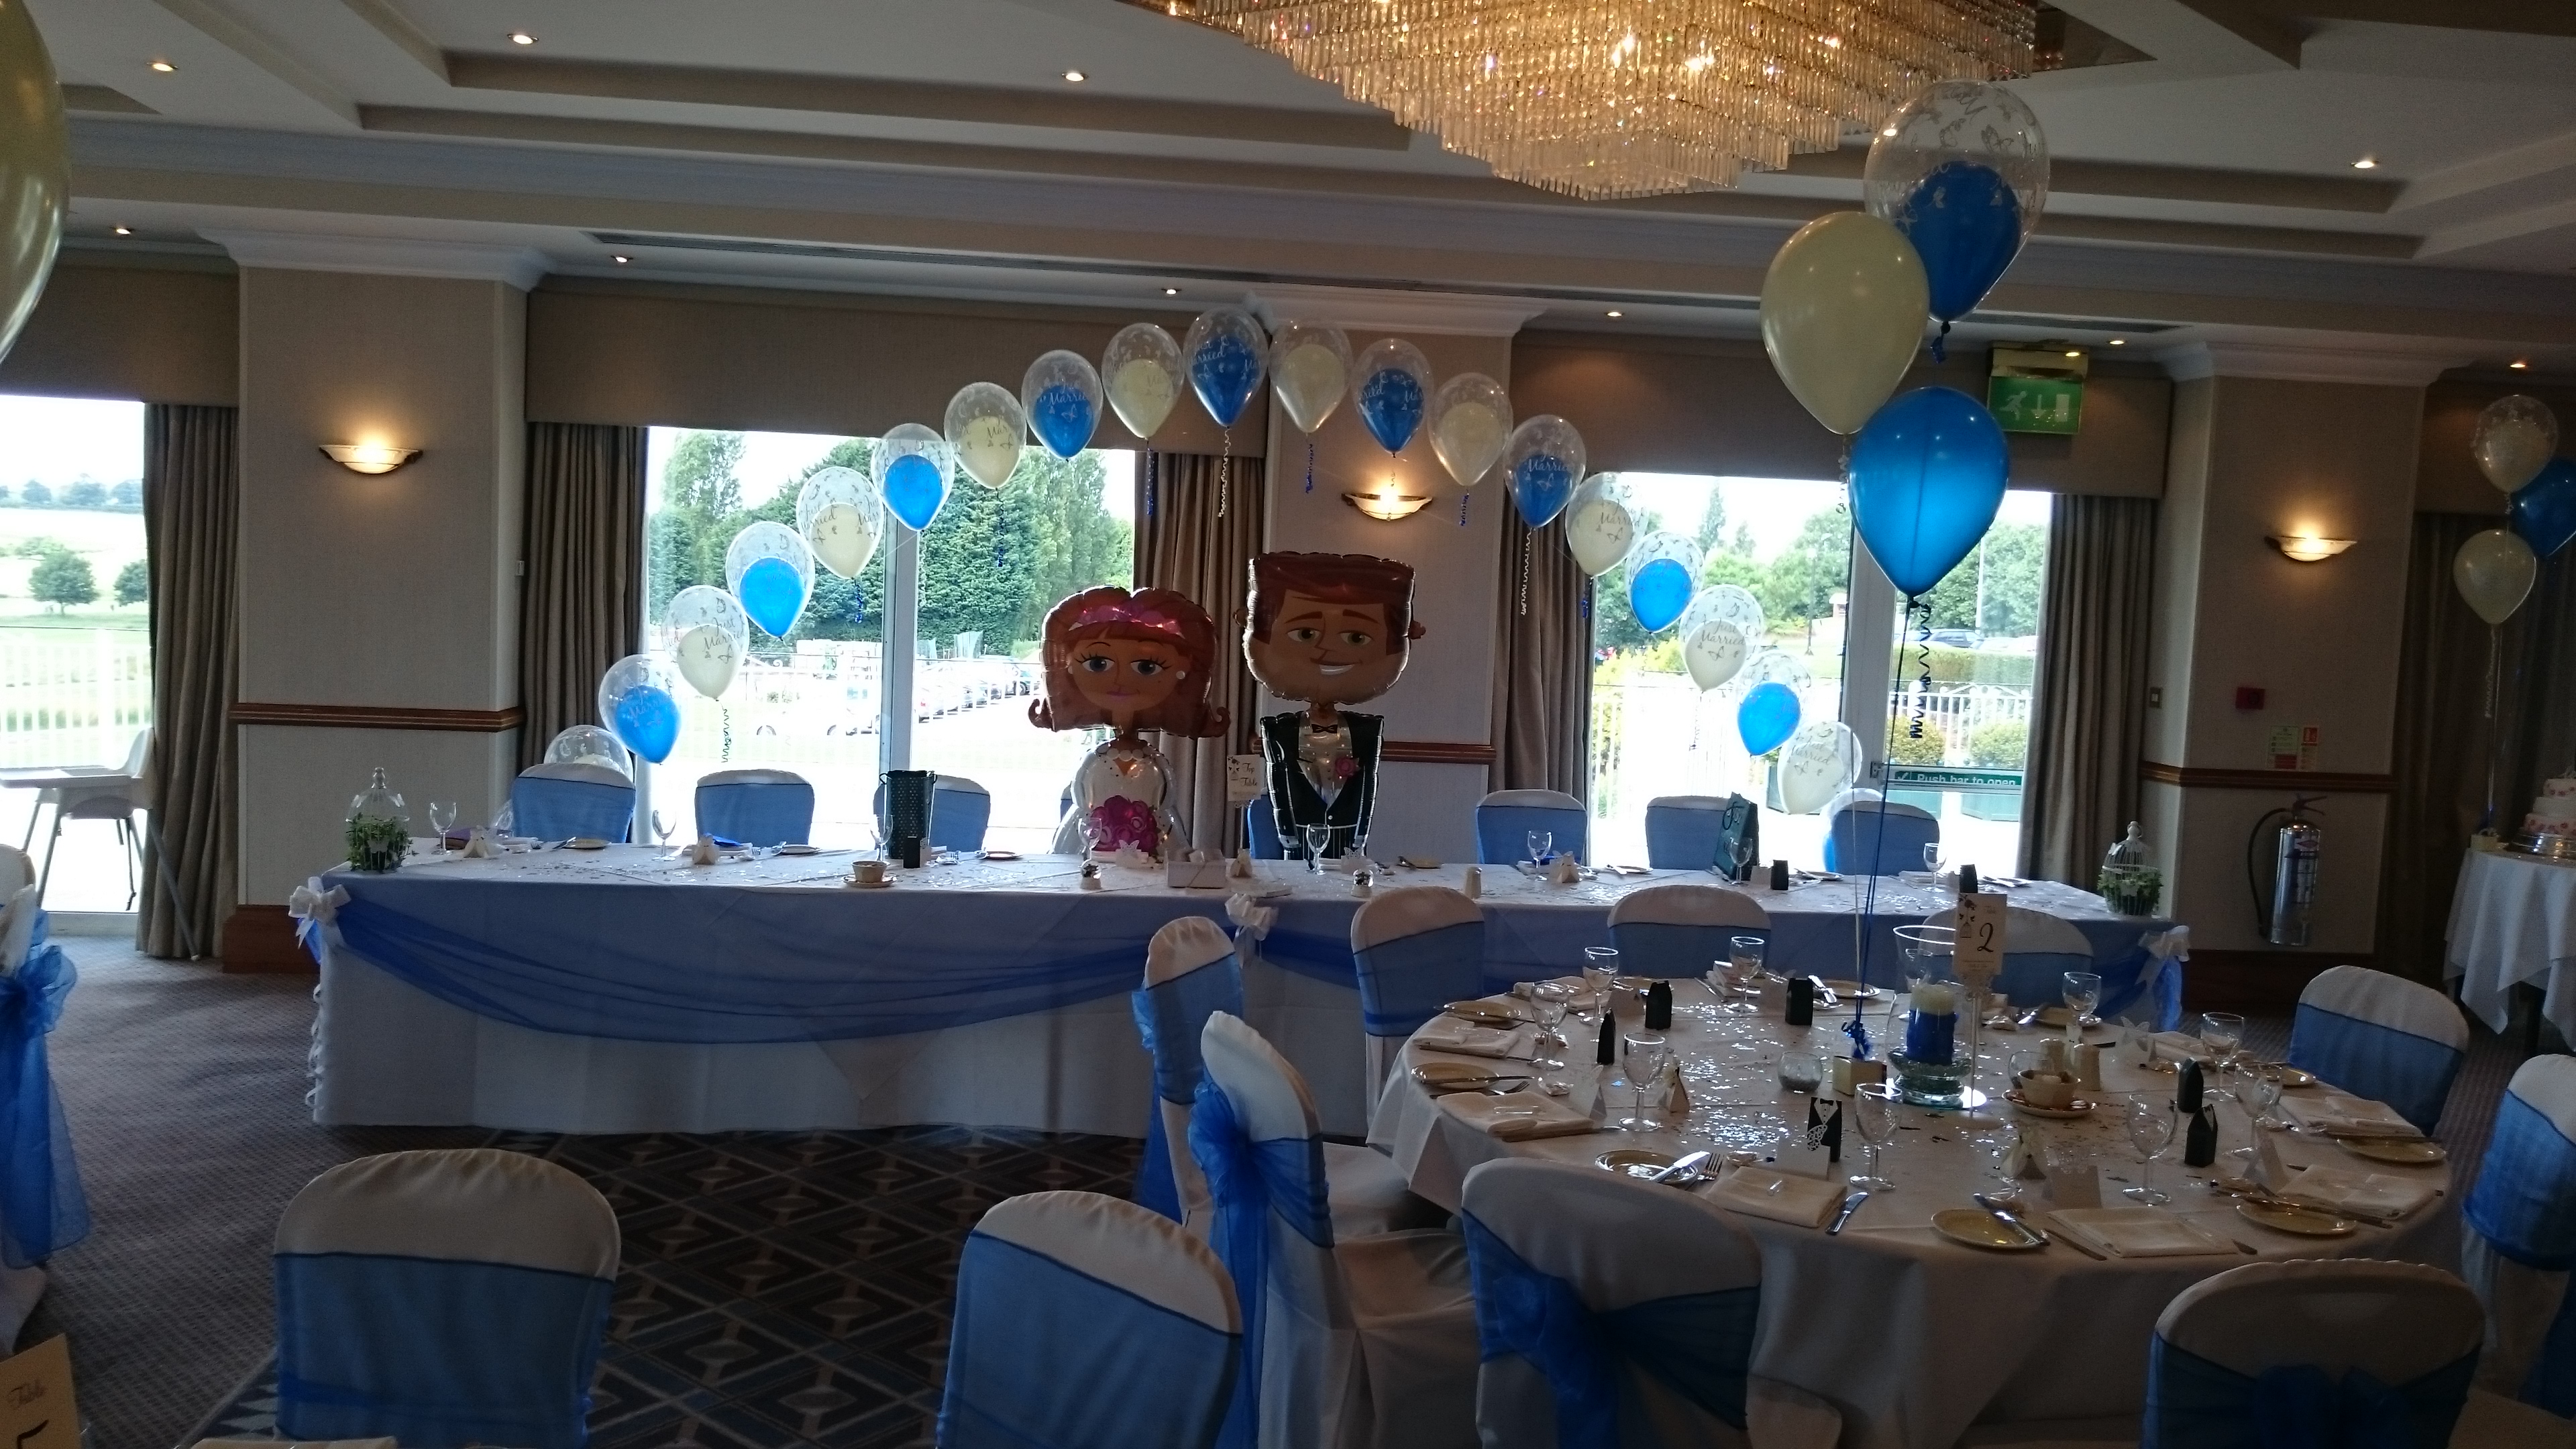 You are currently viewing Lovely Wedding Reception at The Windmill Village Hotel. Some fantastic balloons to compliment the room.